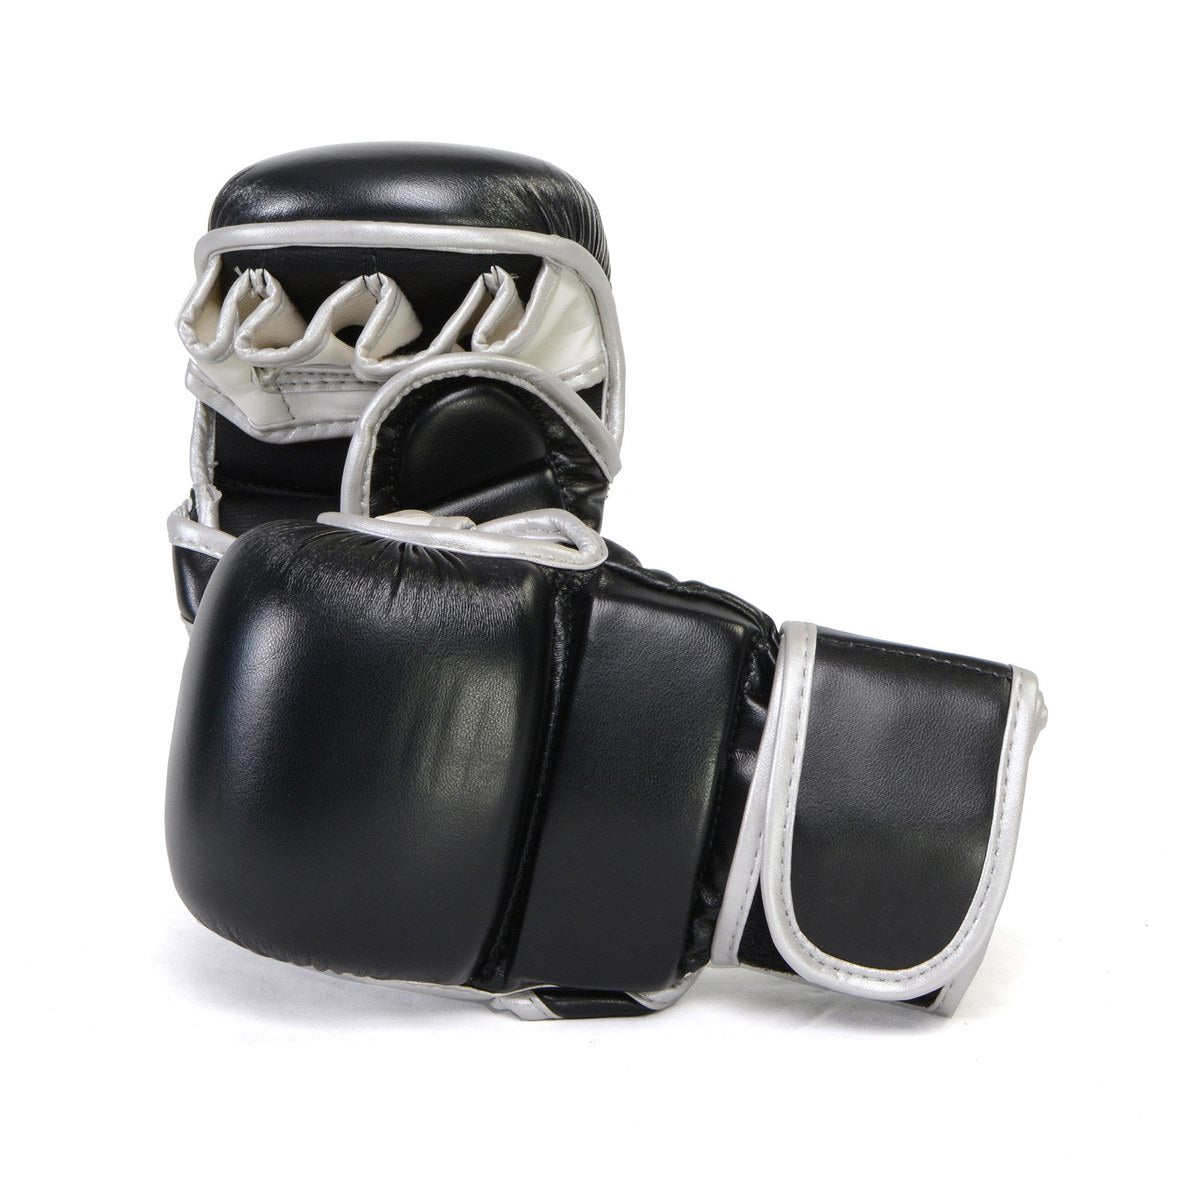 X-Fitness XF2001 7 oz MMA Hybrid Sparring Gloves-BLK/SILVER